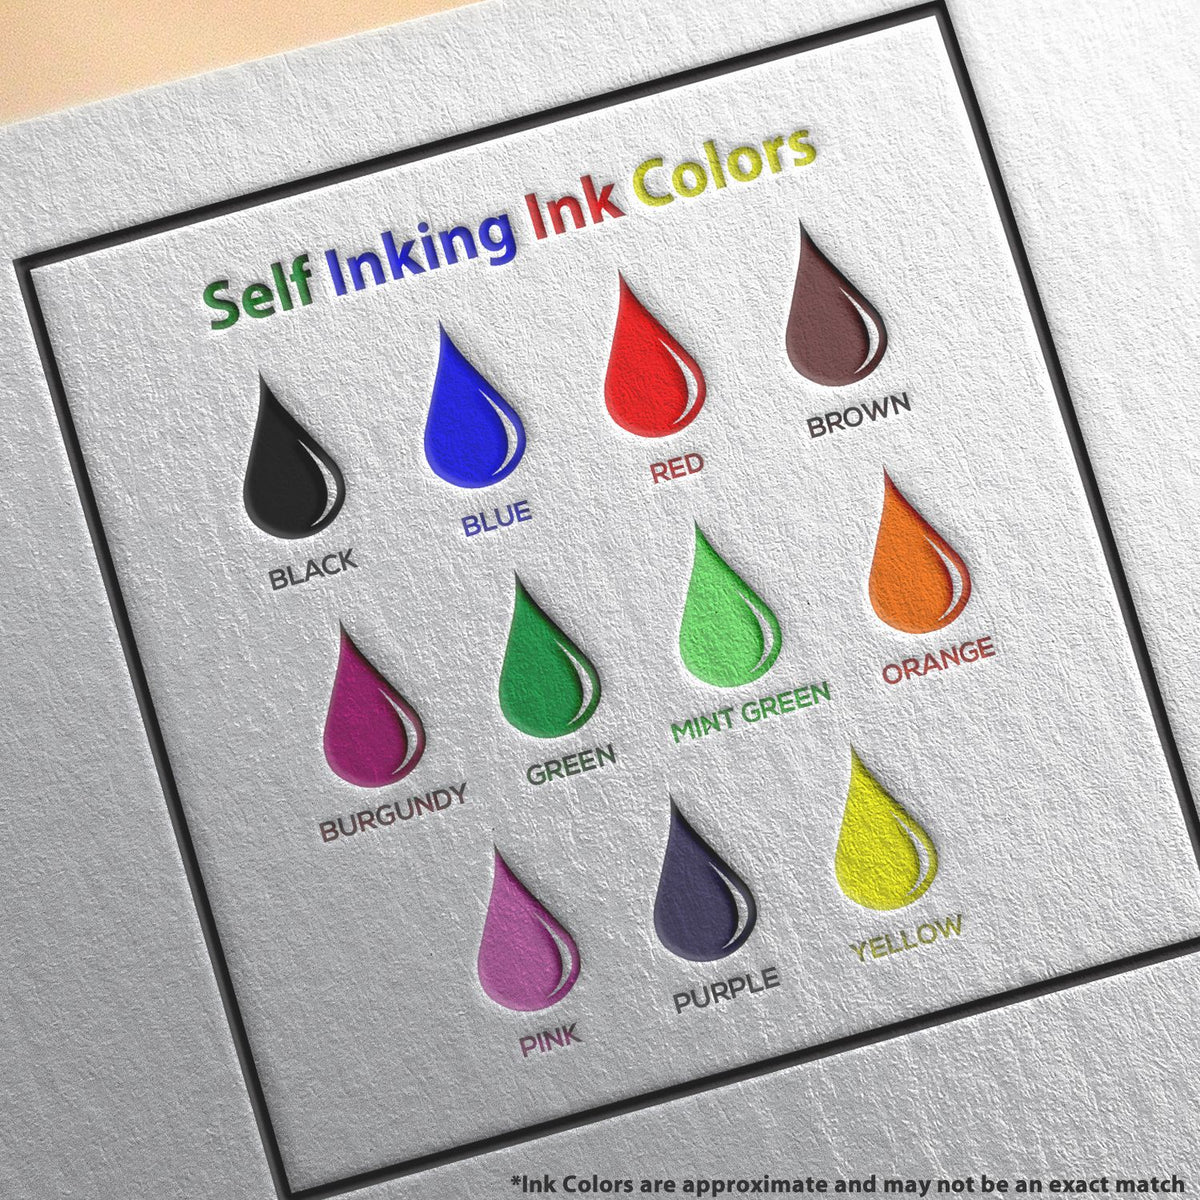 A picture showing the different ink colors or hues available for the Self-Inking New Hampshire Landscape Architect Stamp product.